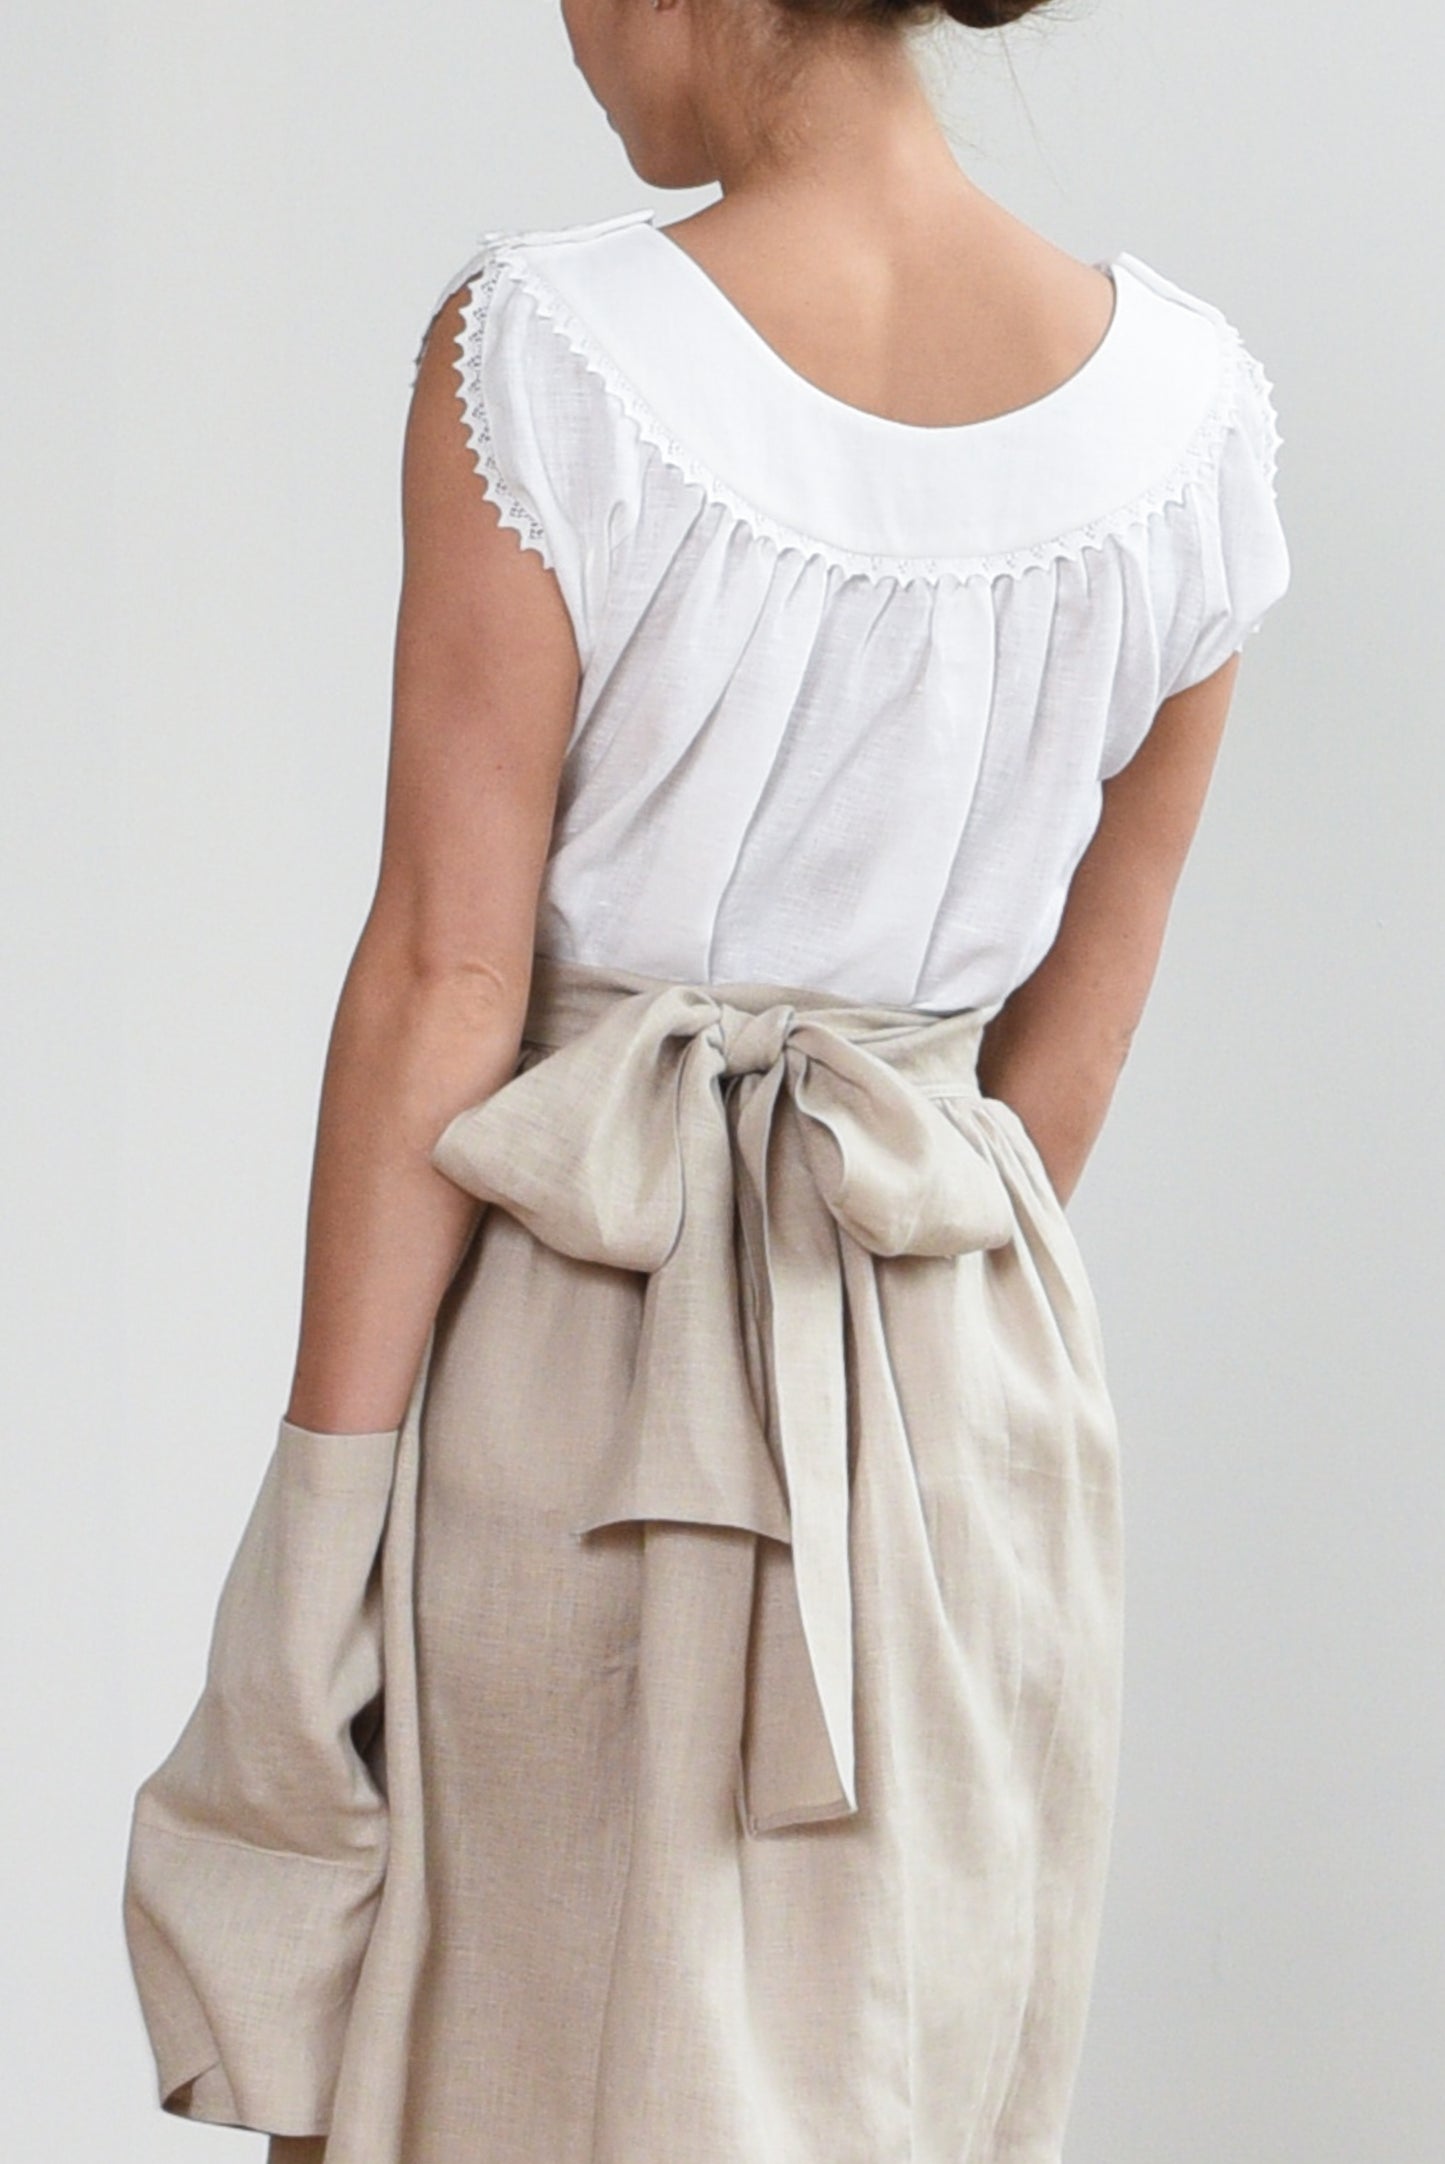 Grethel Tie-Wrap Skirt with Pockets in Natural linen